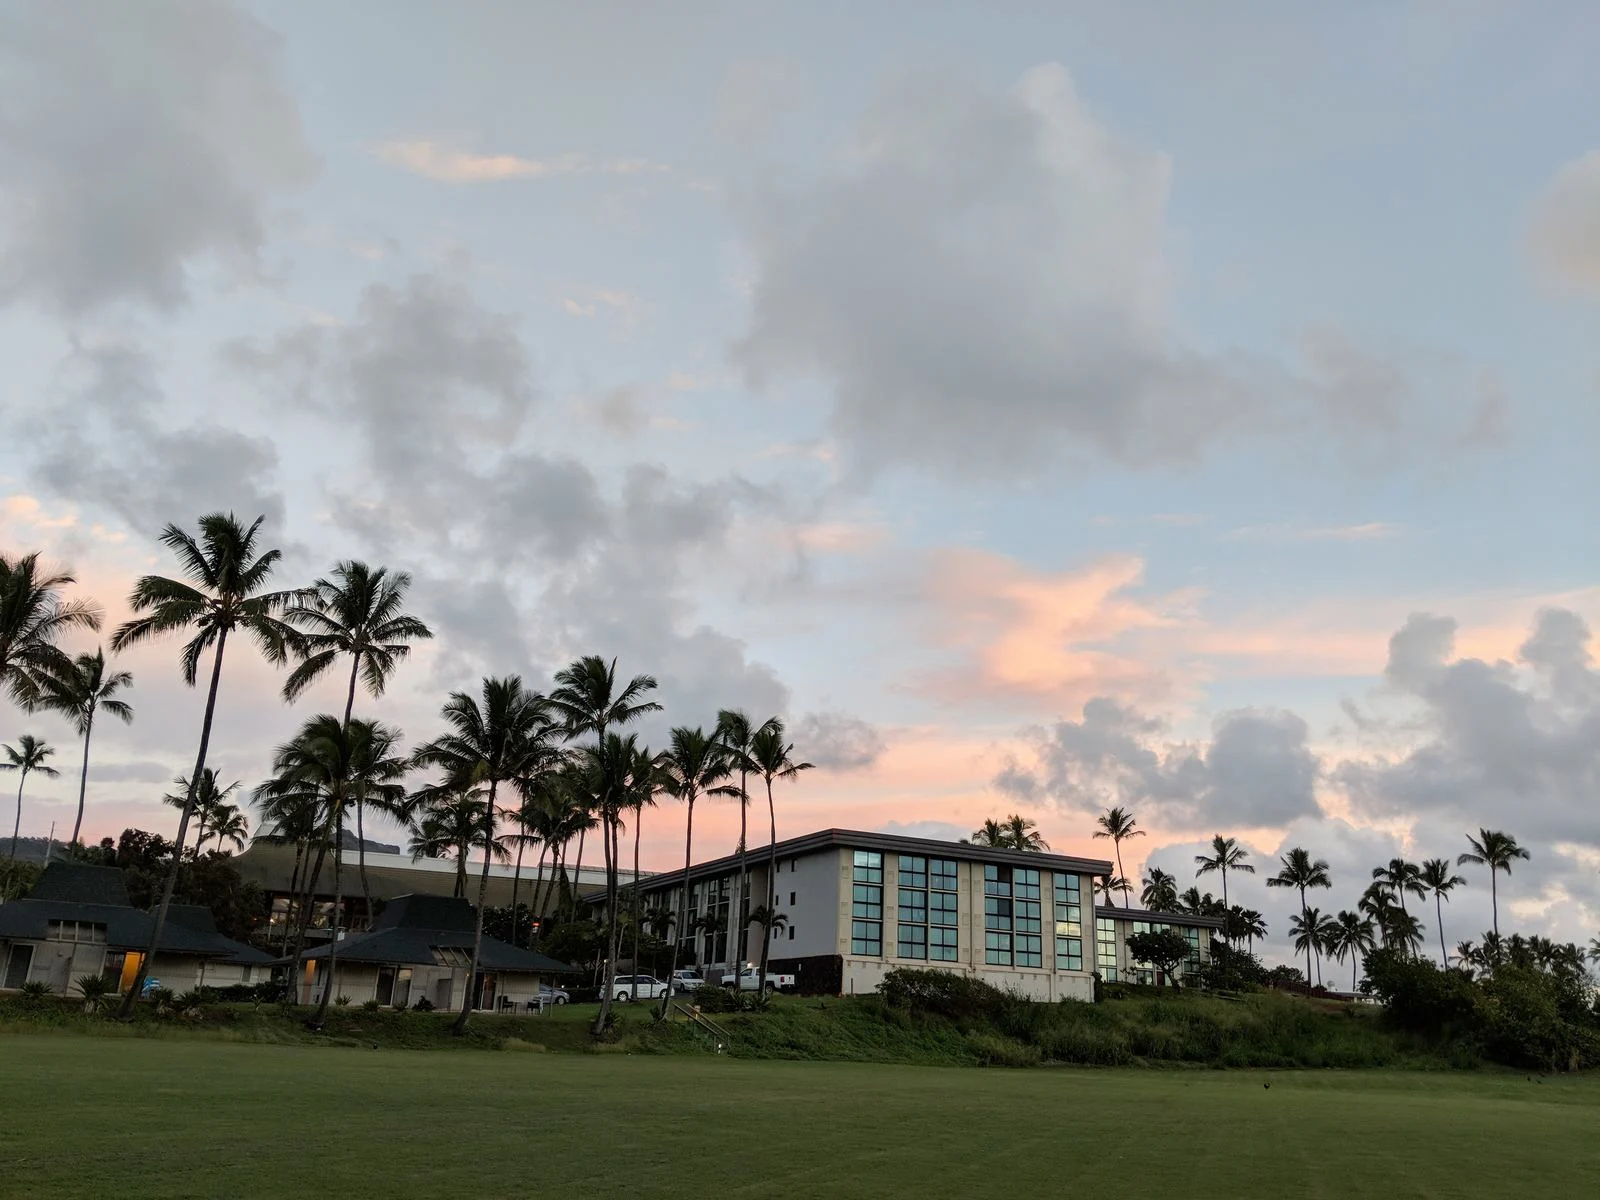 Early morning sky over Hilton Garden Inn Kauai Wailua Bay, photographed from the shore as a piece on the best hotels in Kauai, where cars are parked beside its structure